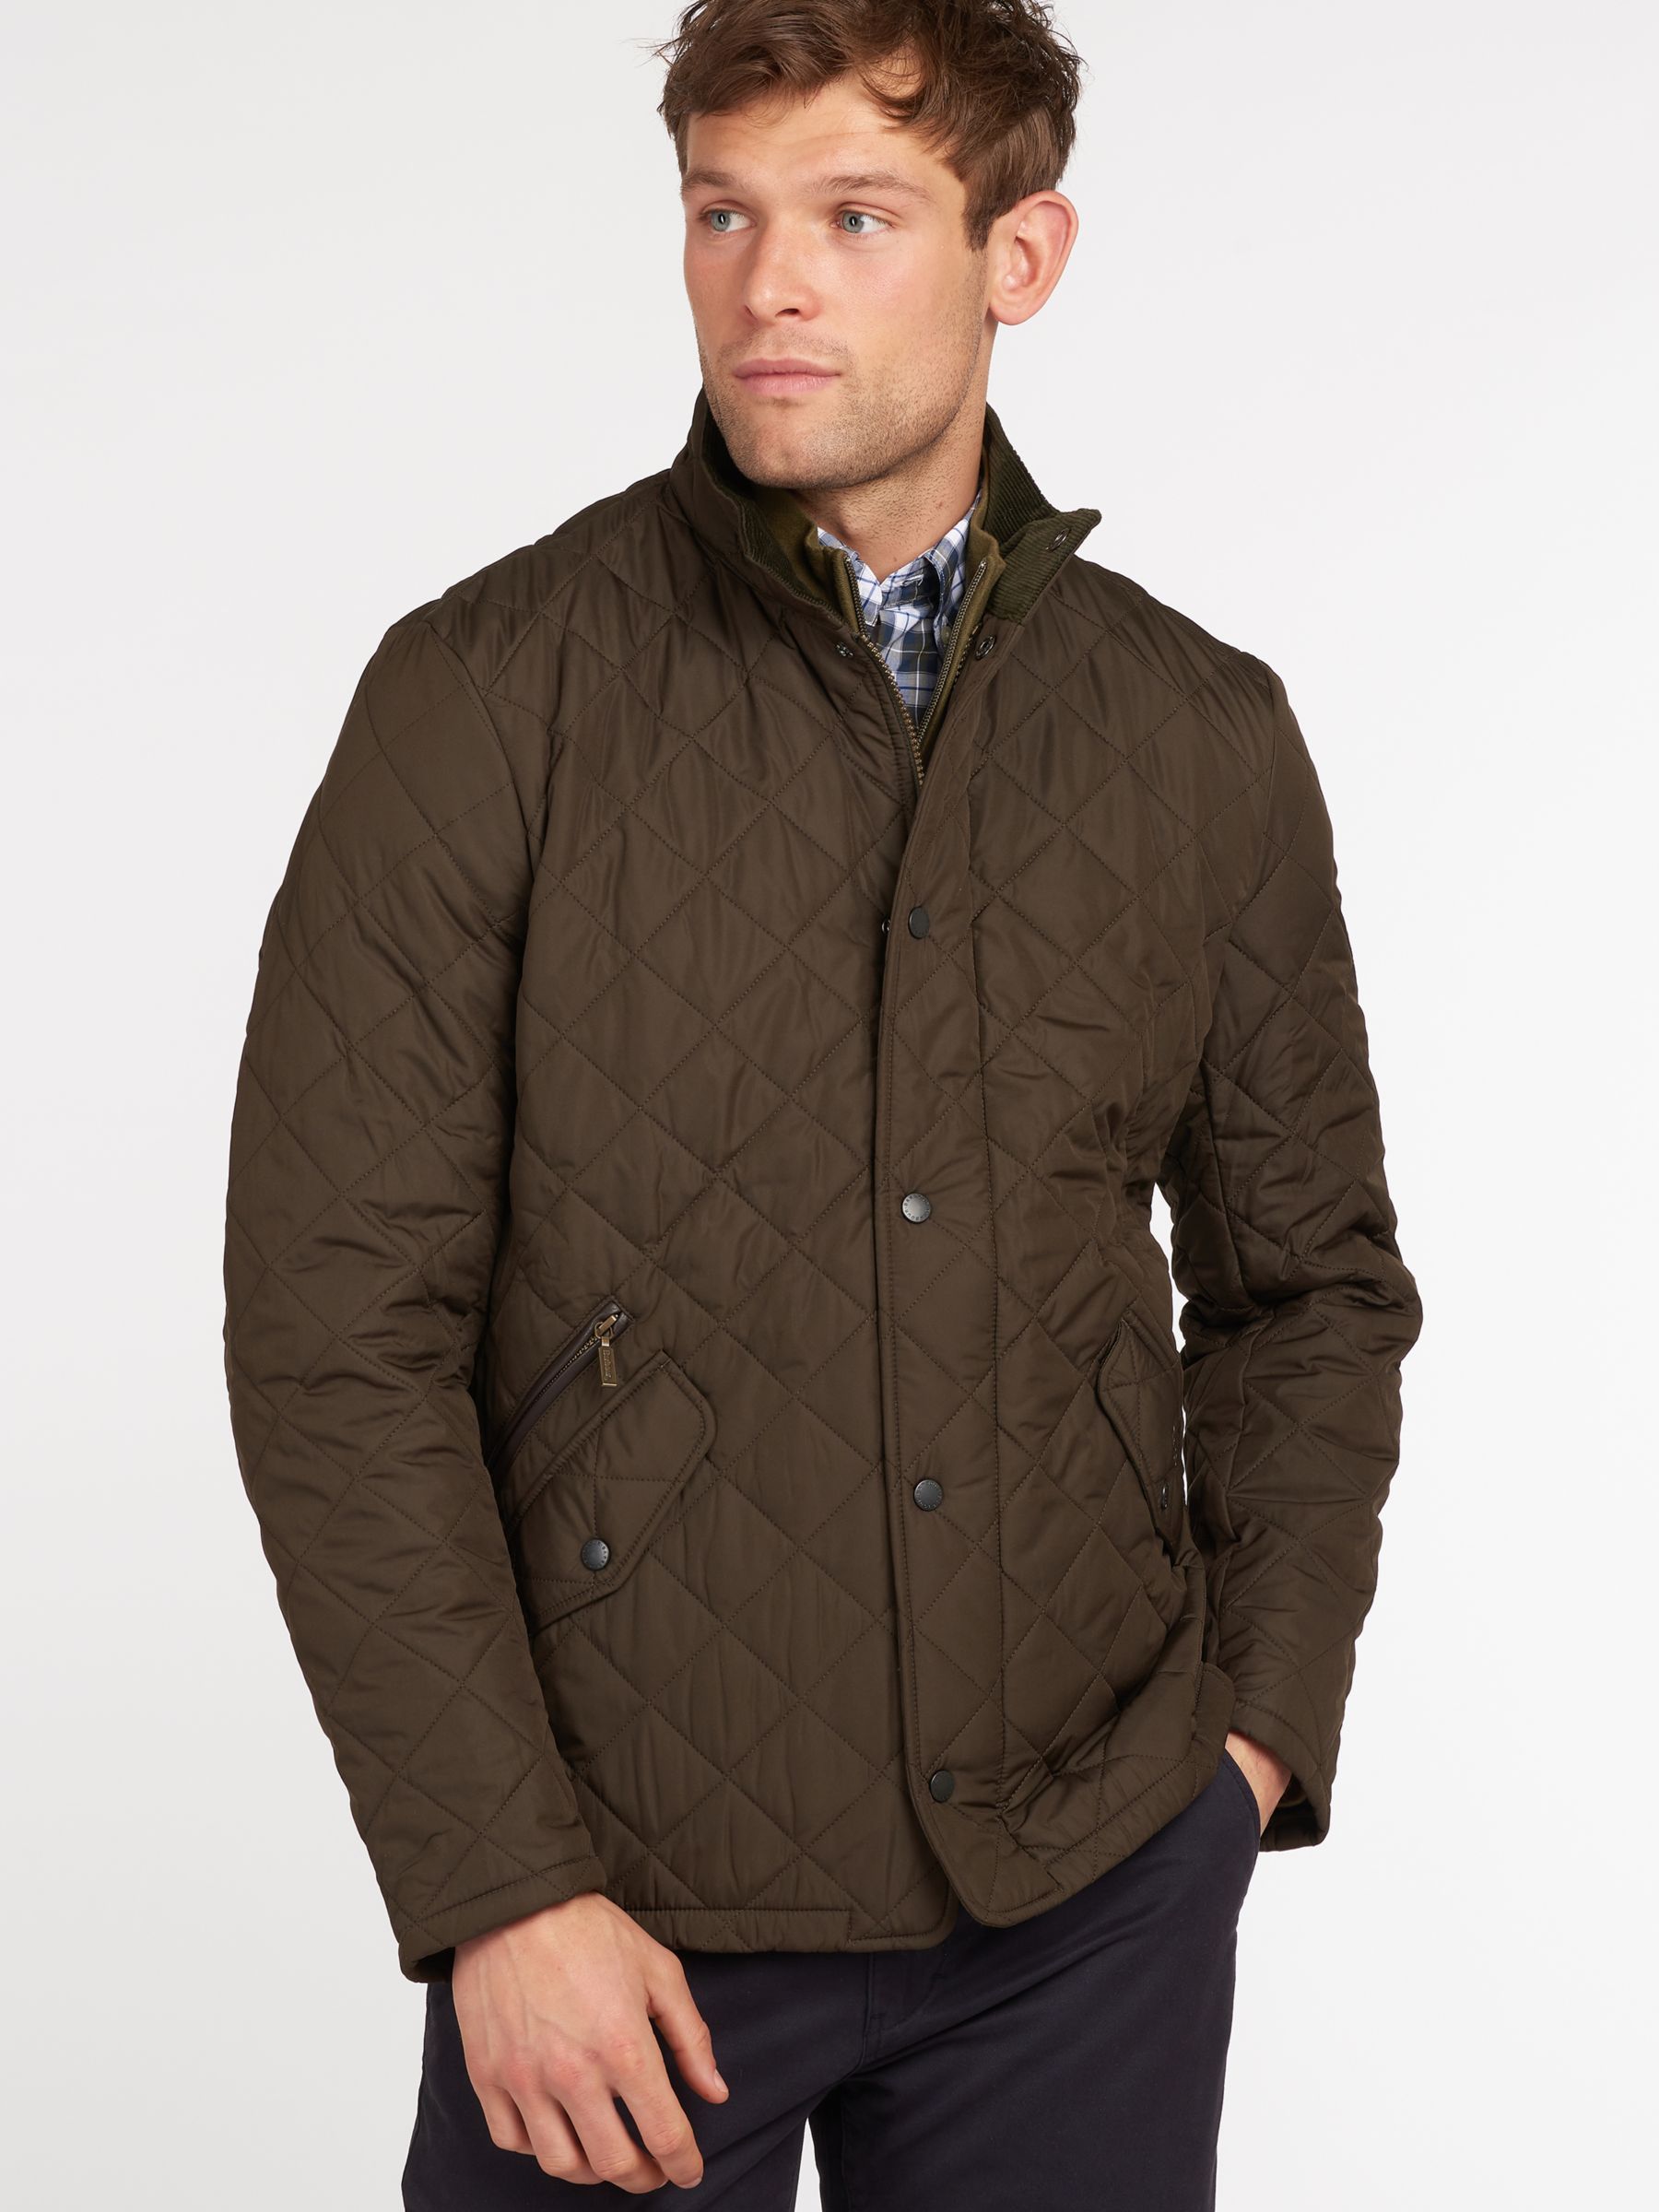 Barbour Chelsea Sportsquilt Quilted Jacket, Olive at John Lewis & Partners